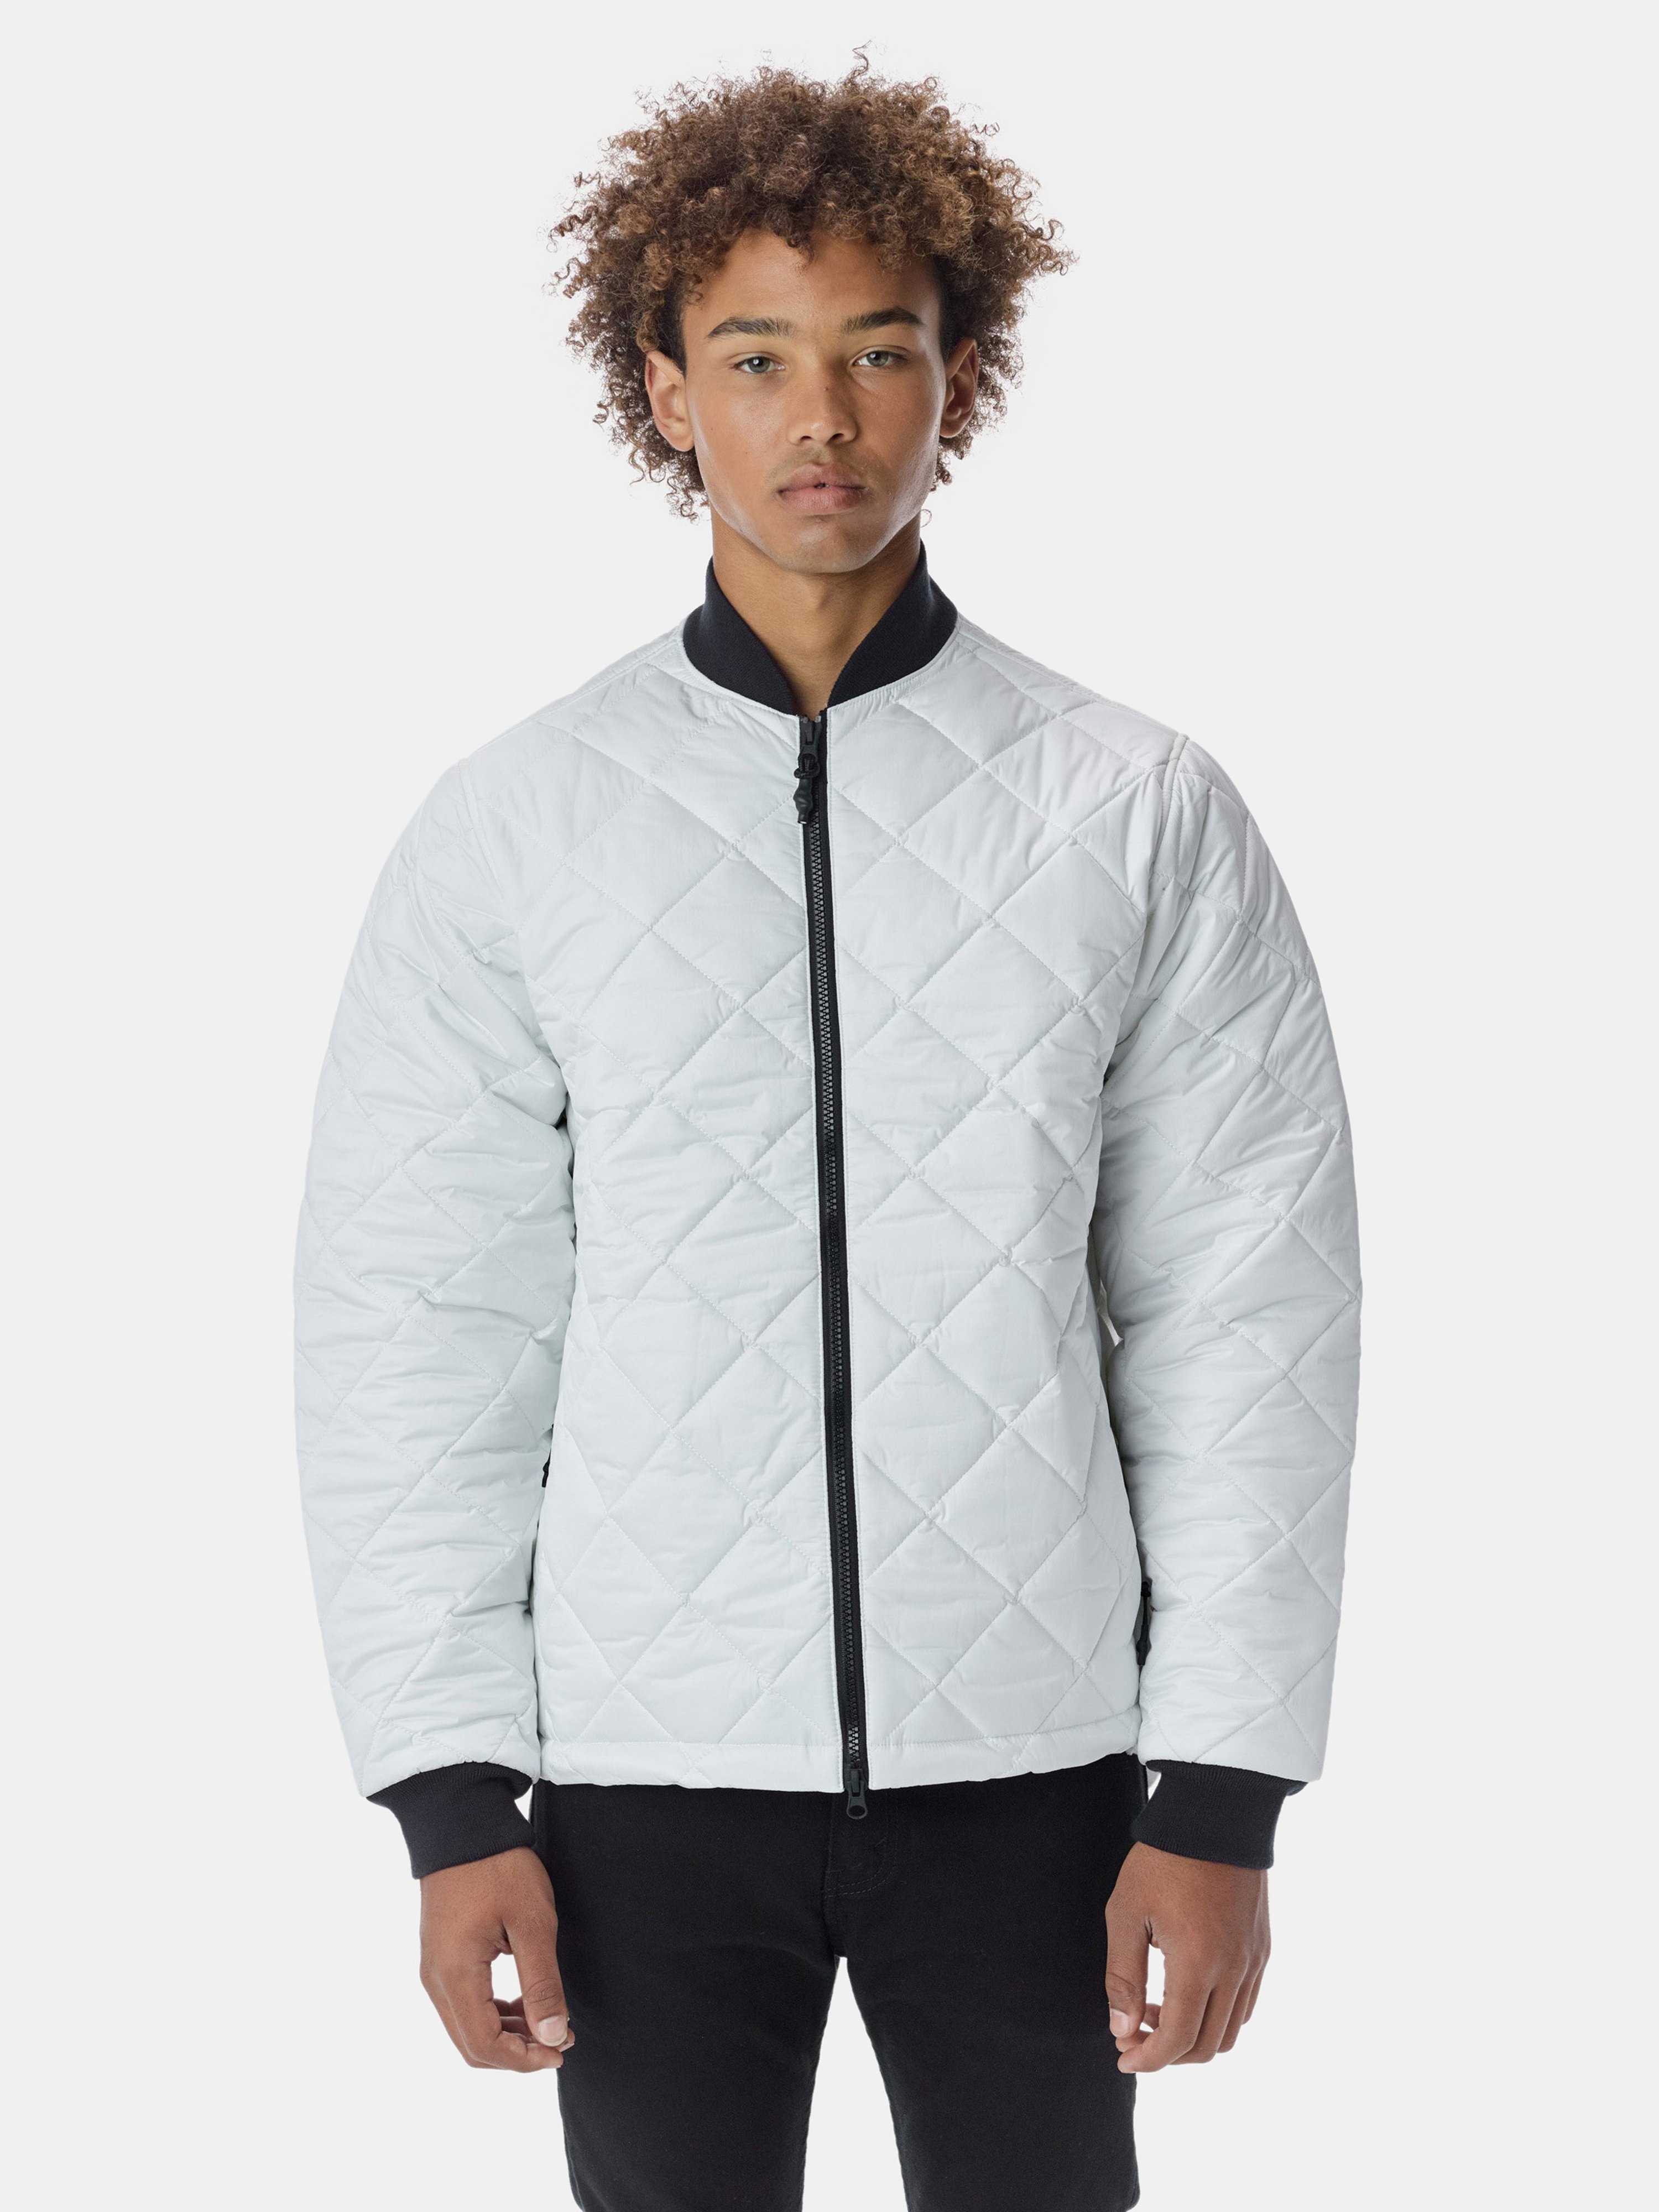 THE VERY WARM THE VERY WARM QUILTED BOMBER